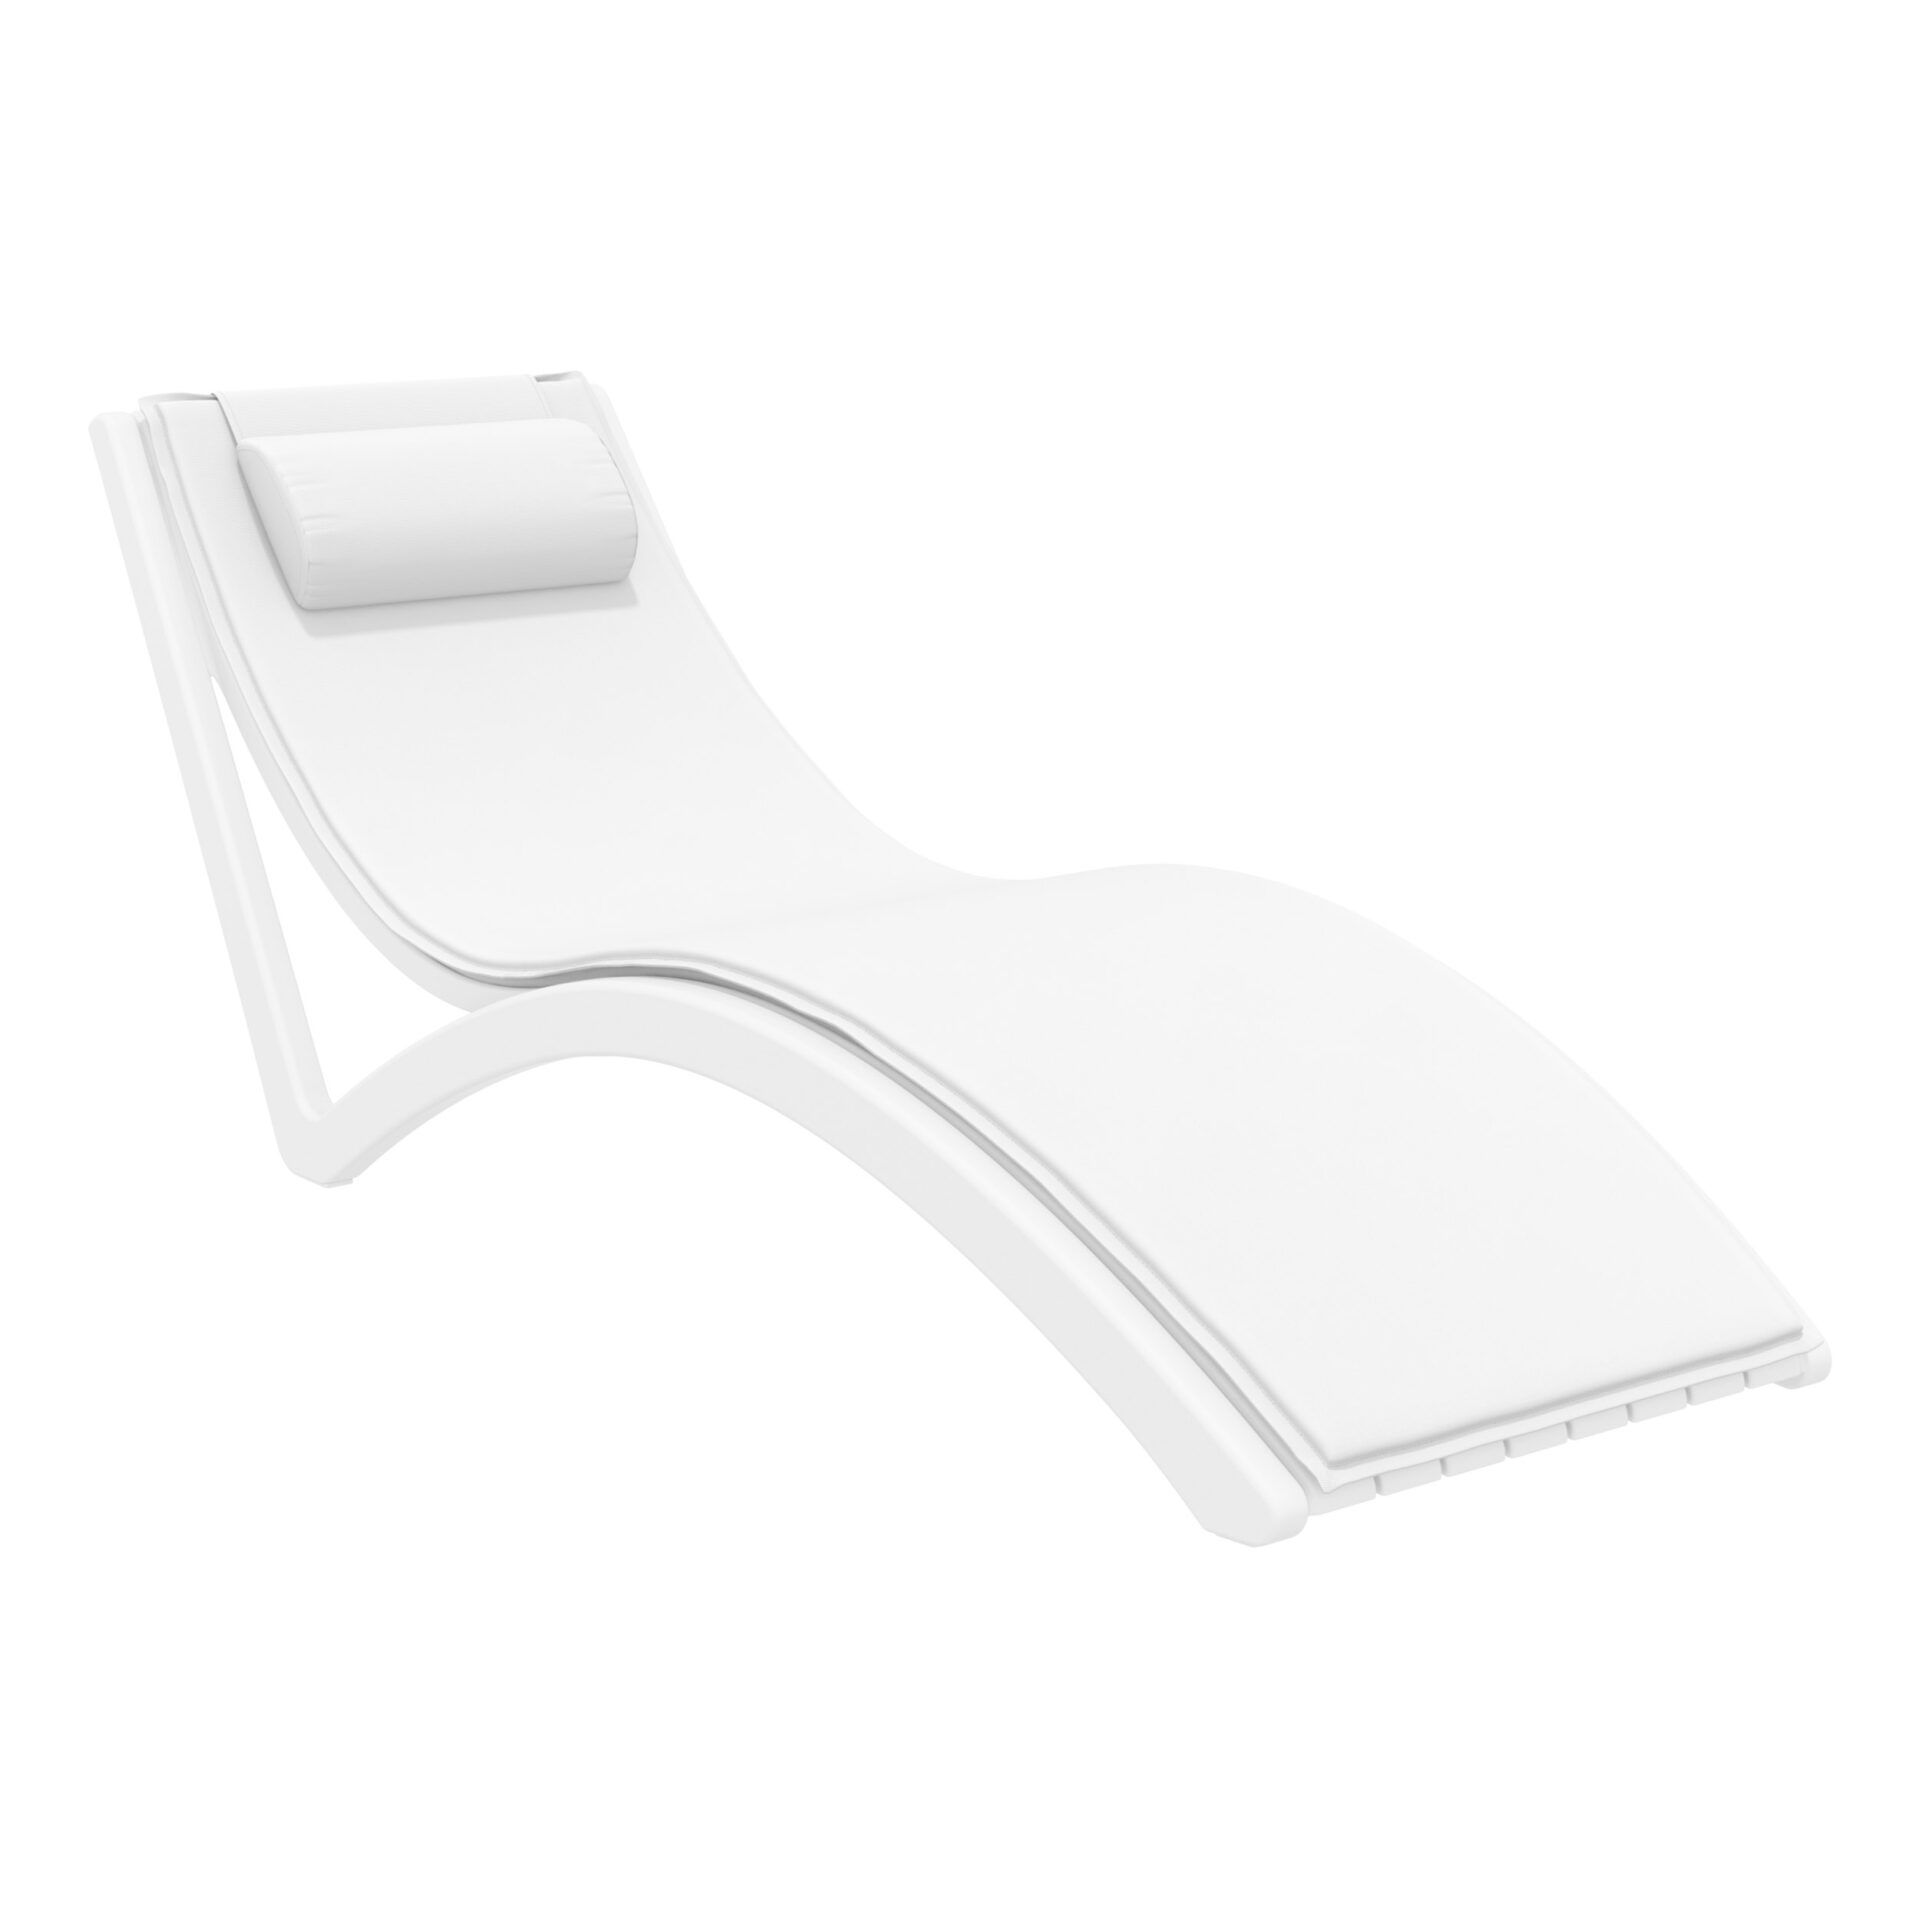 Slim Sunlounger - White with White Cushion and Pillow